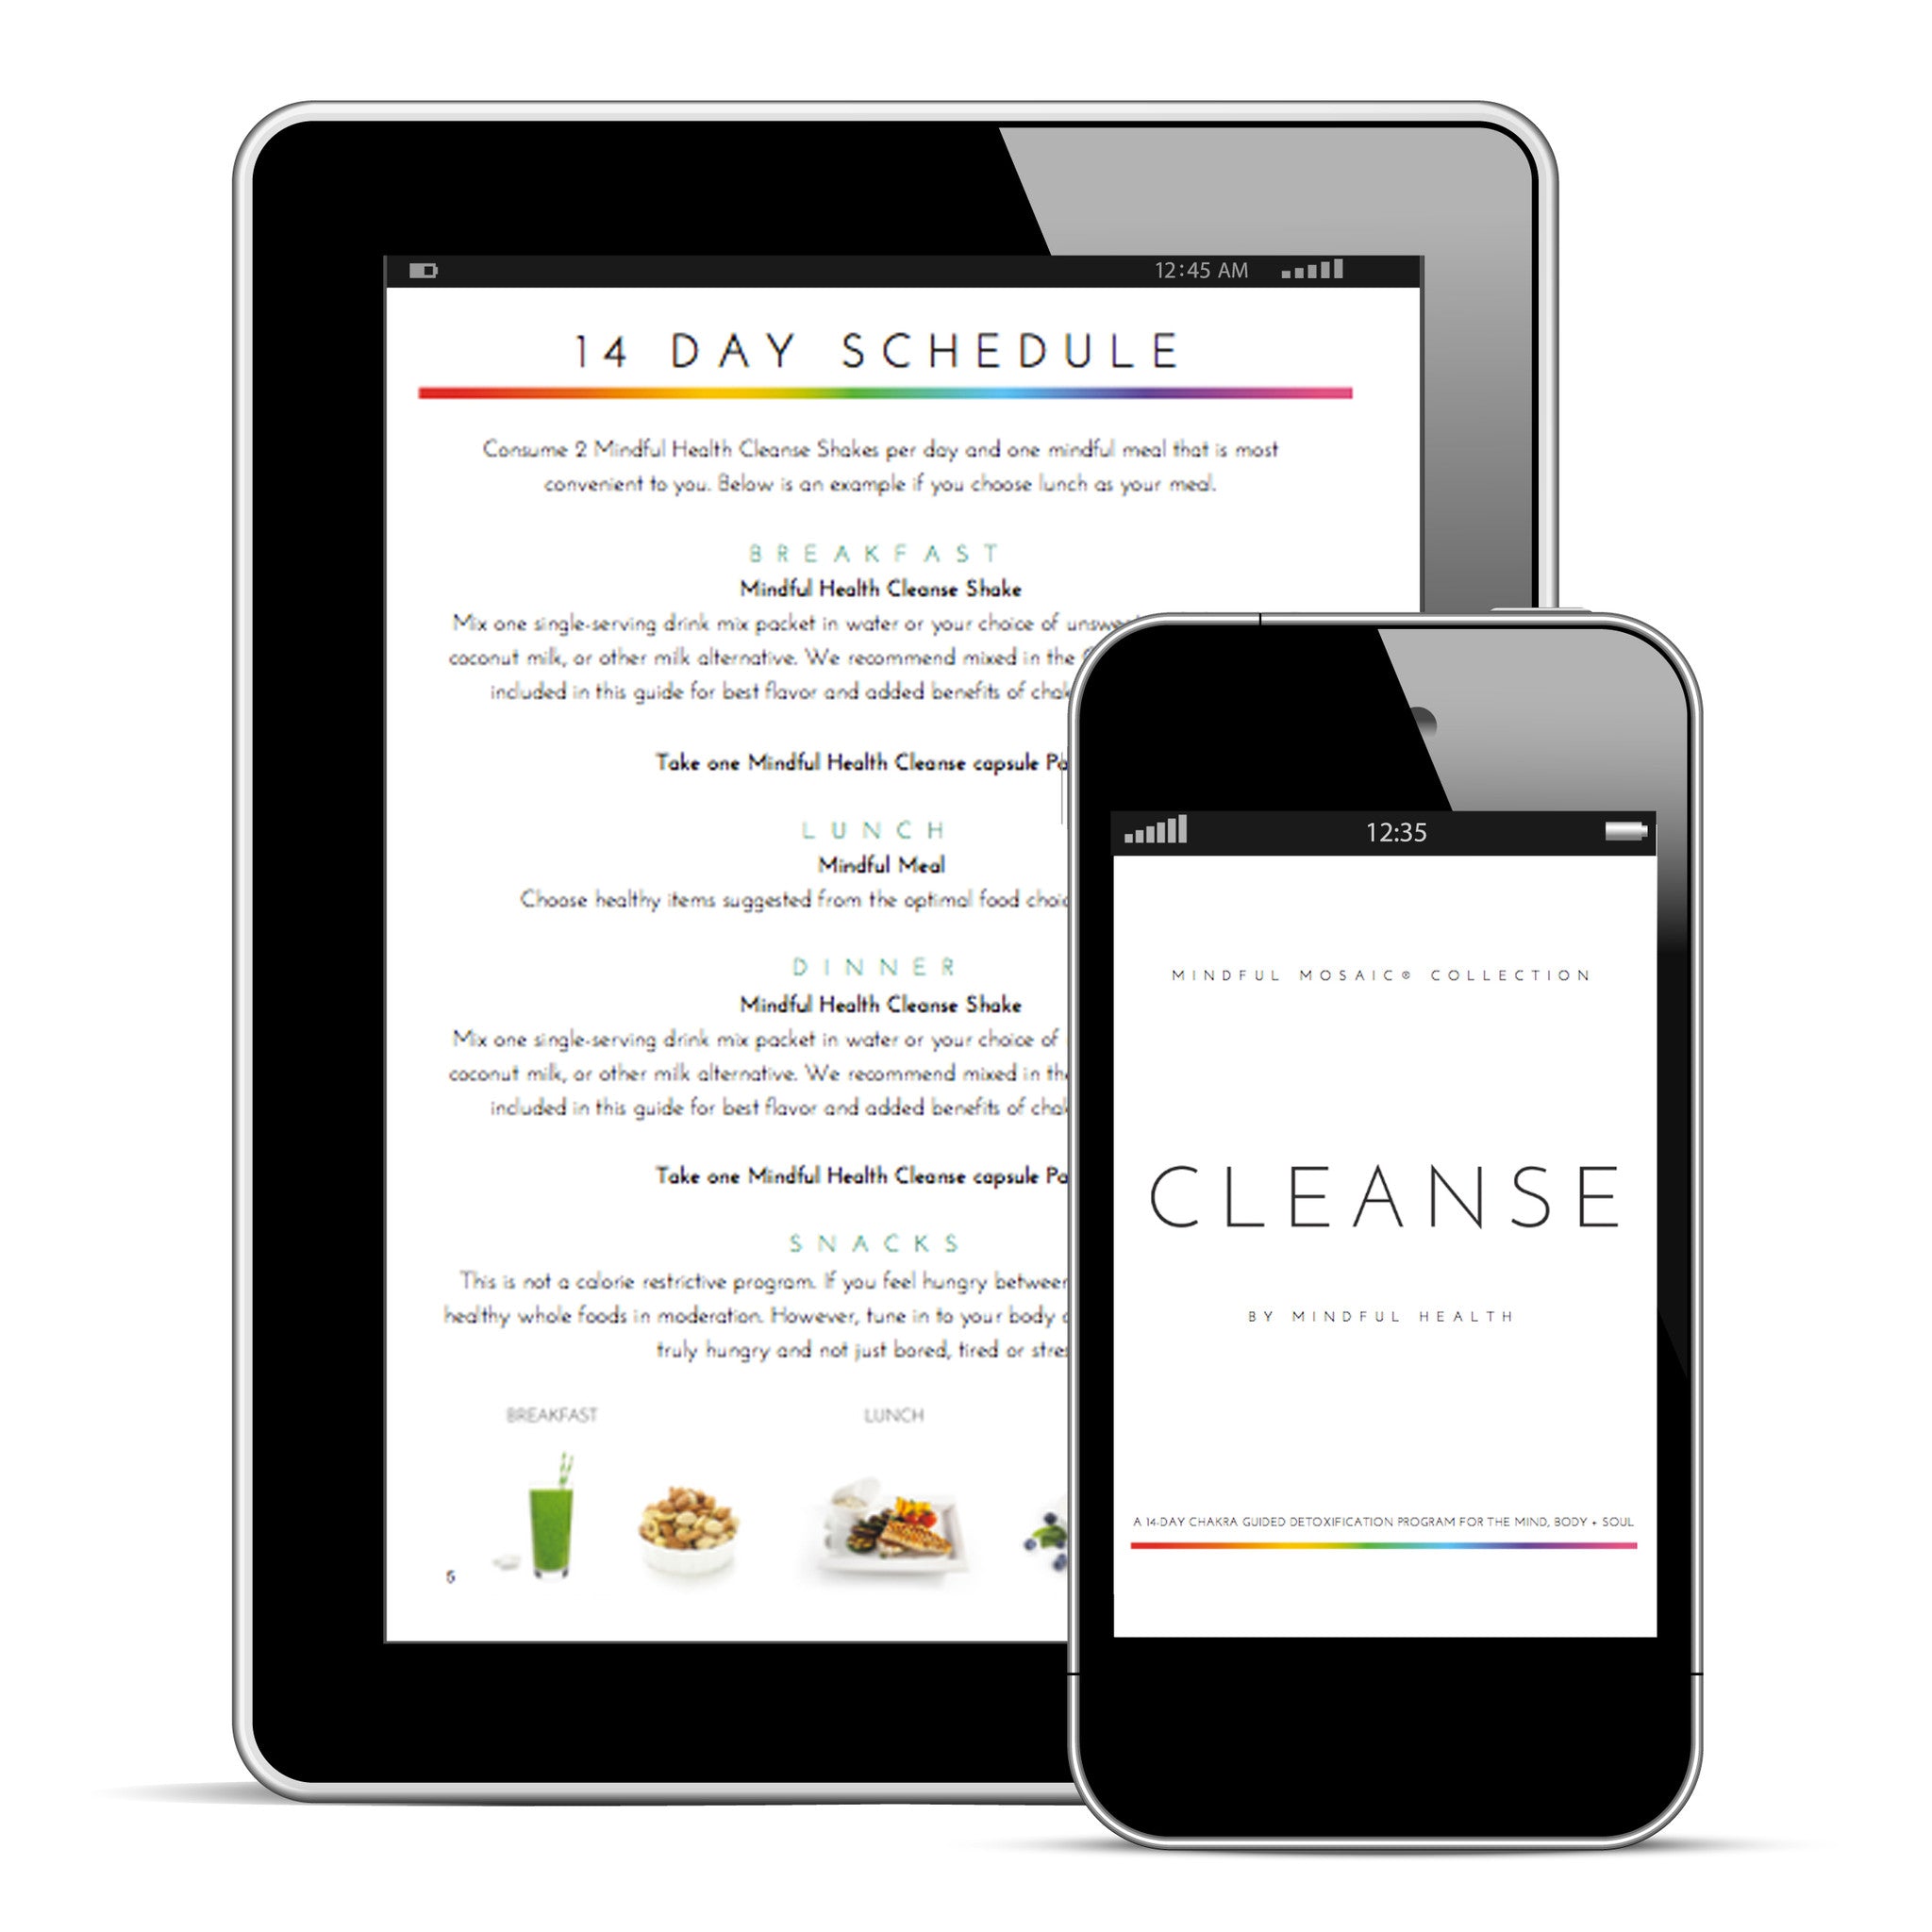 CLEANSE by Mindful Health